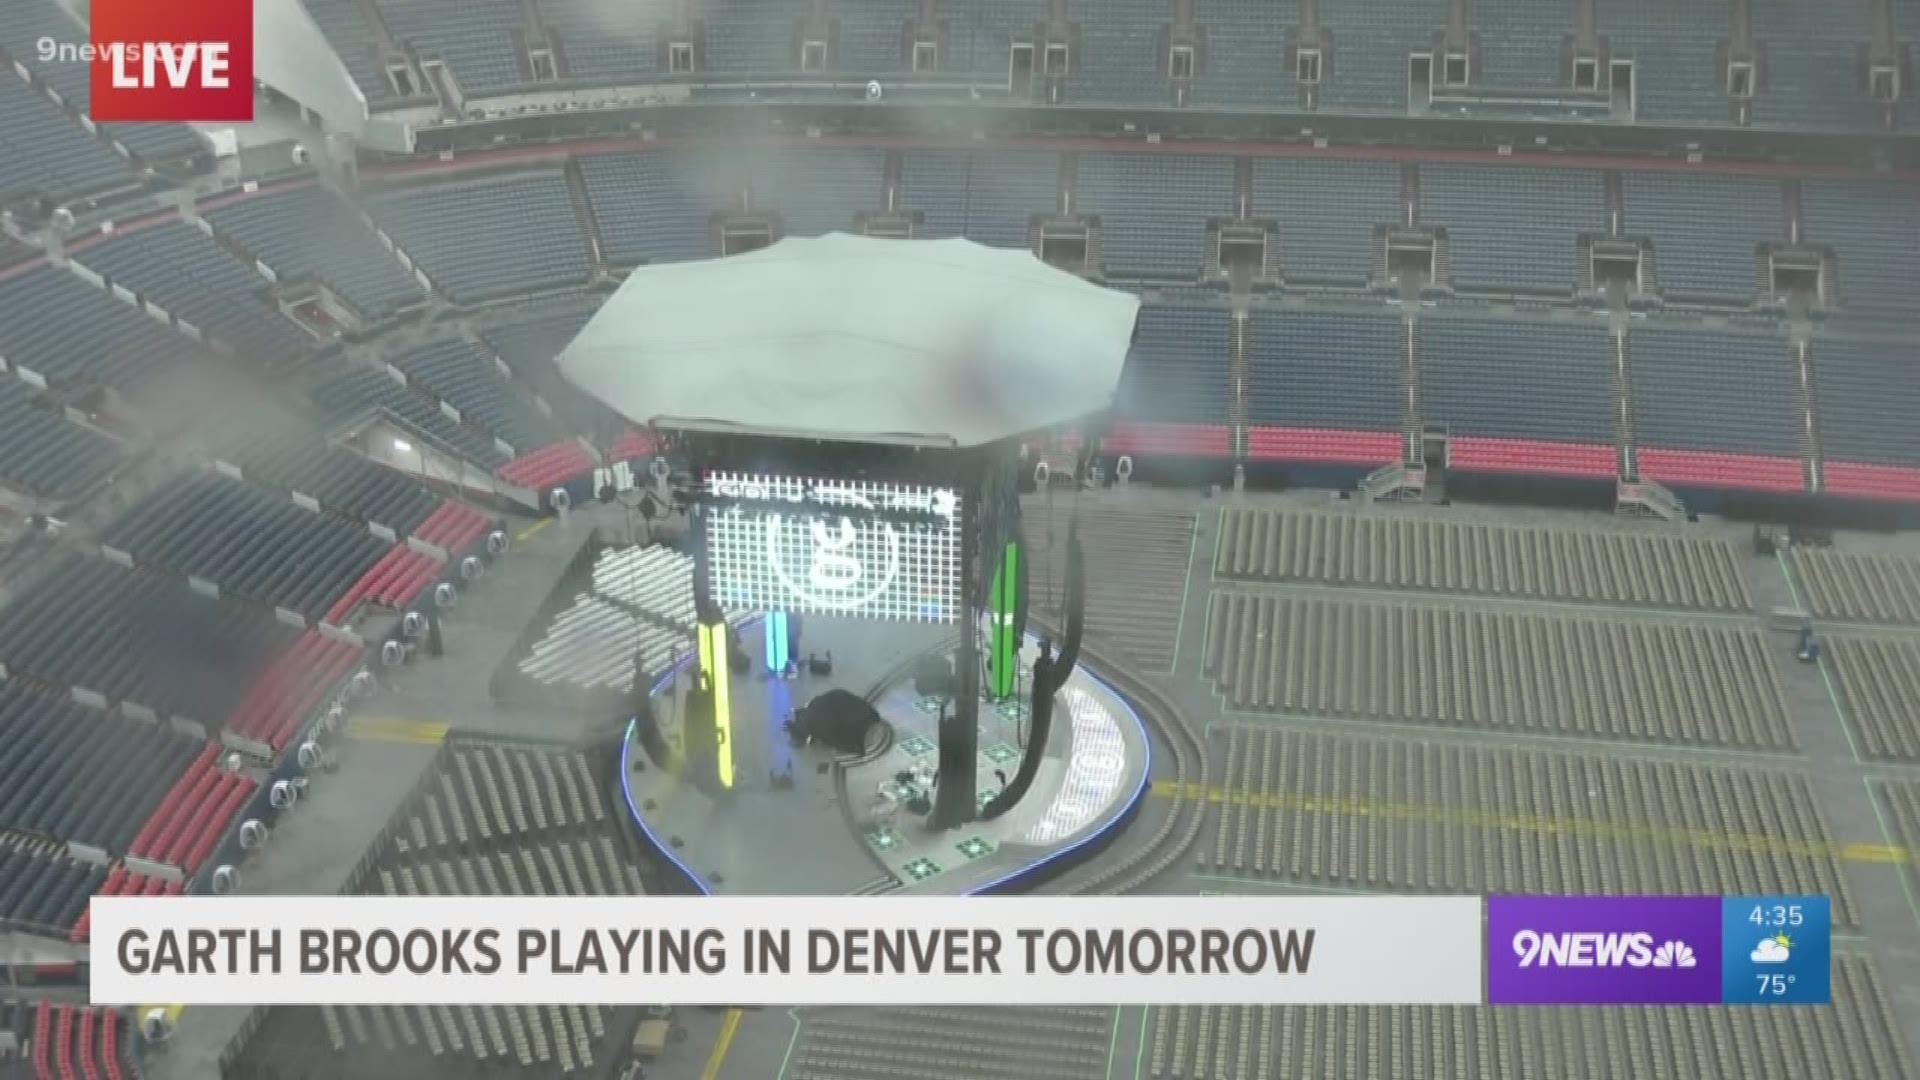 Denver Public Works says if you don't already have a parking space, use another mode of transportation that doesn't involve a car to get to Garth Brooks' soldout Denver show.